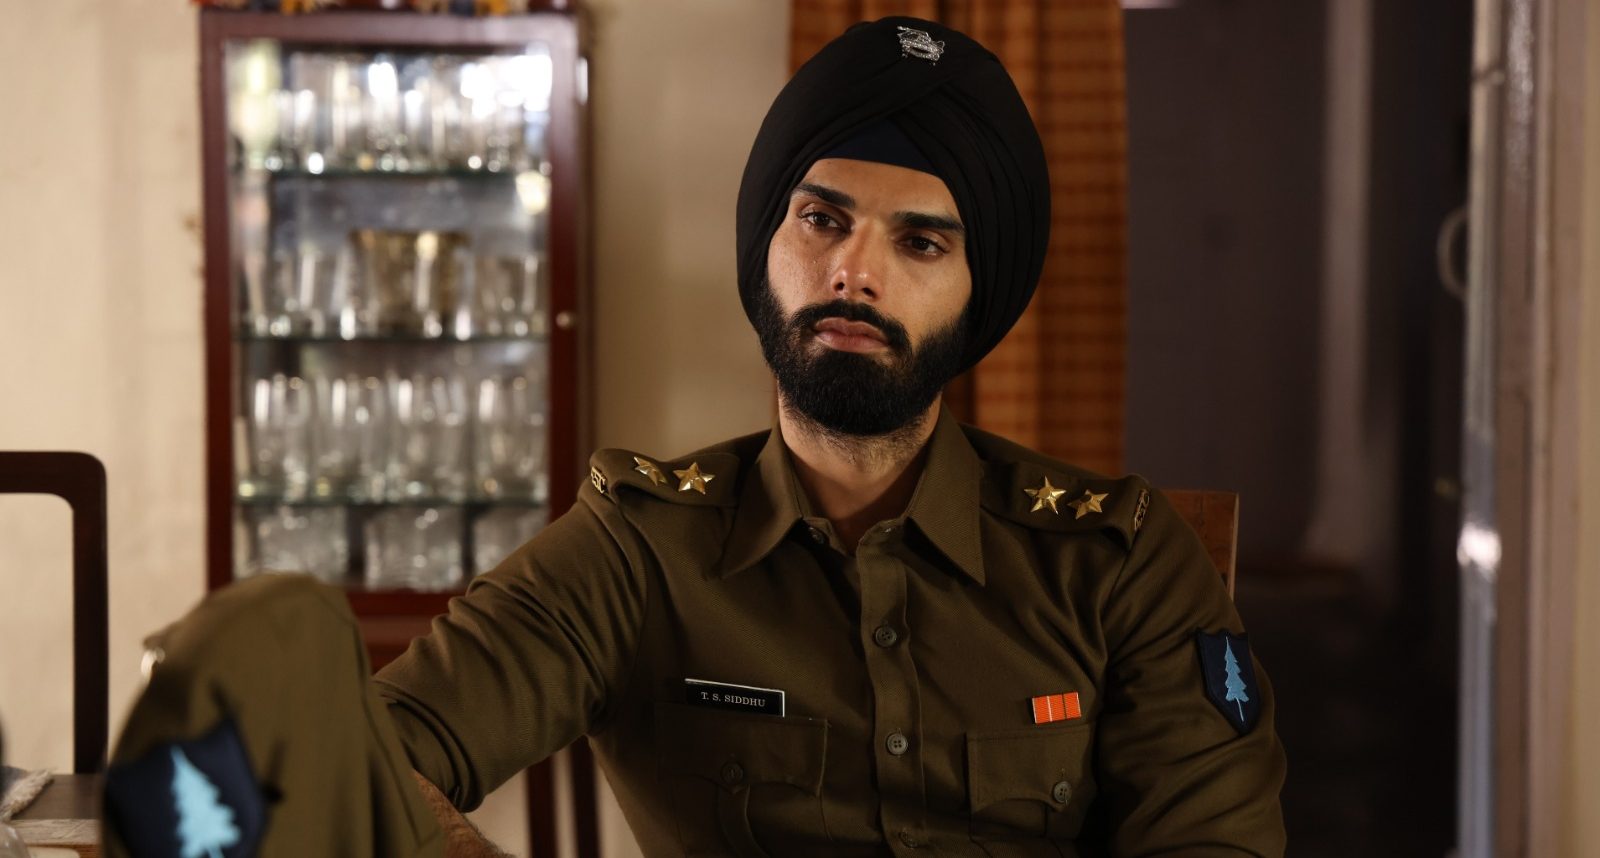 Pippa actor Anuj Duhan says, “I spent hours meditating in a Gurudwara to embody the character authenticity”!